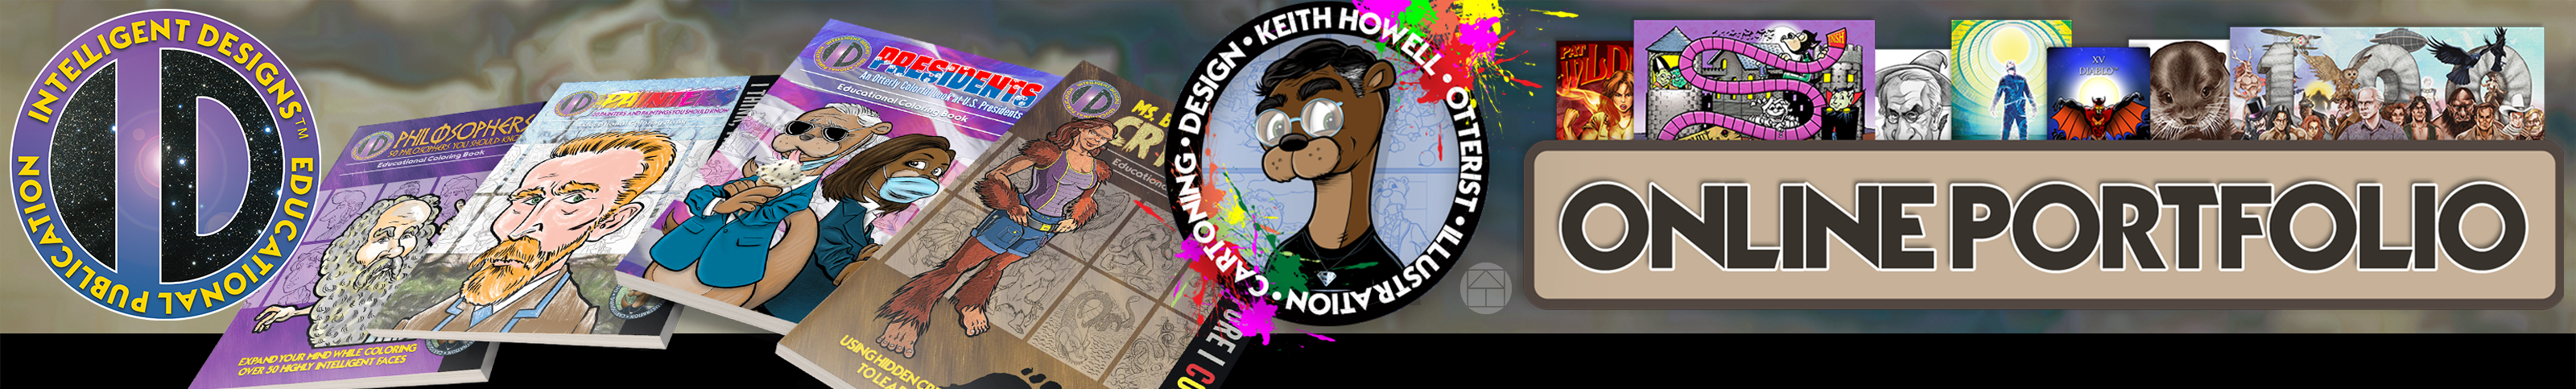 Keith Howell's profile banner